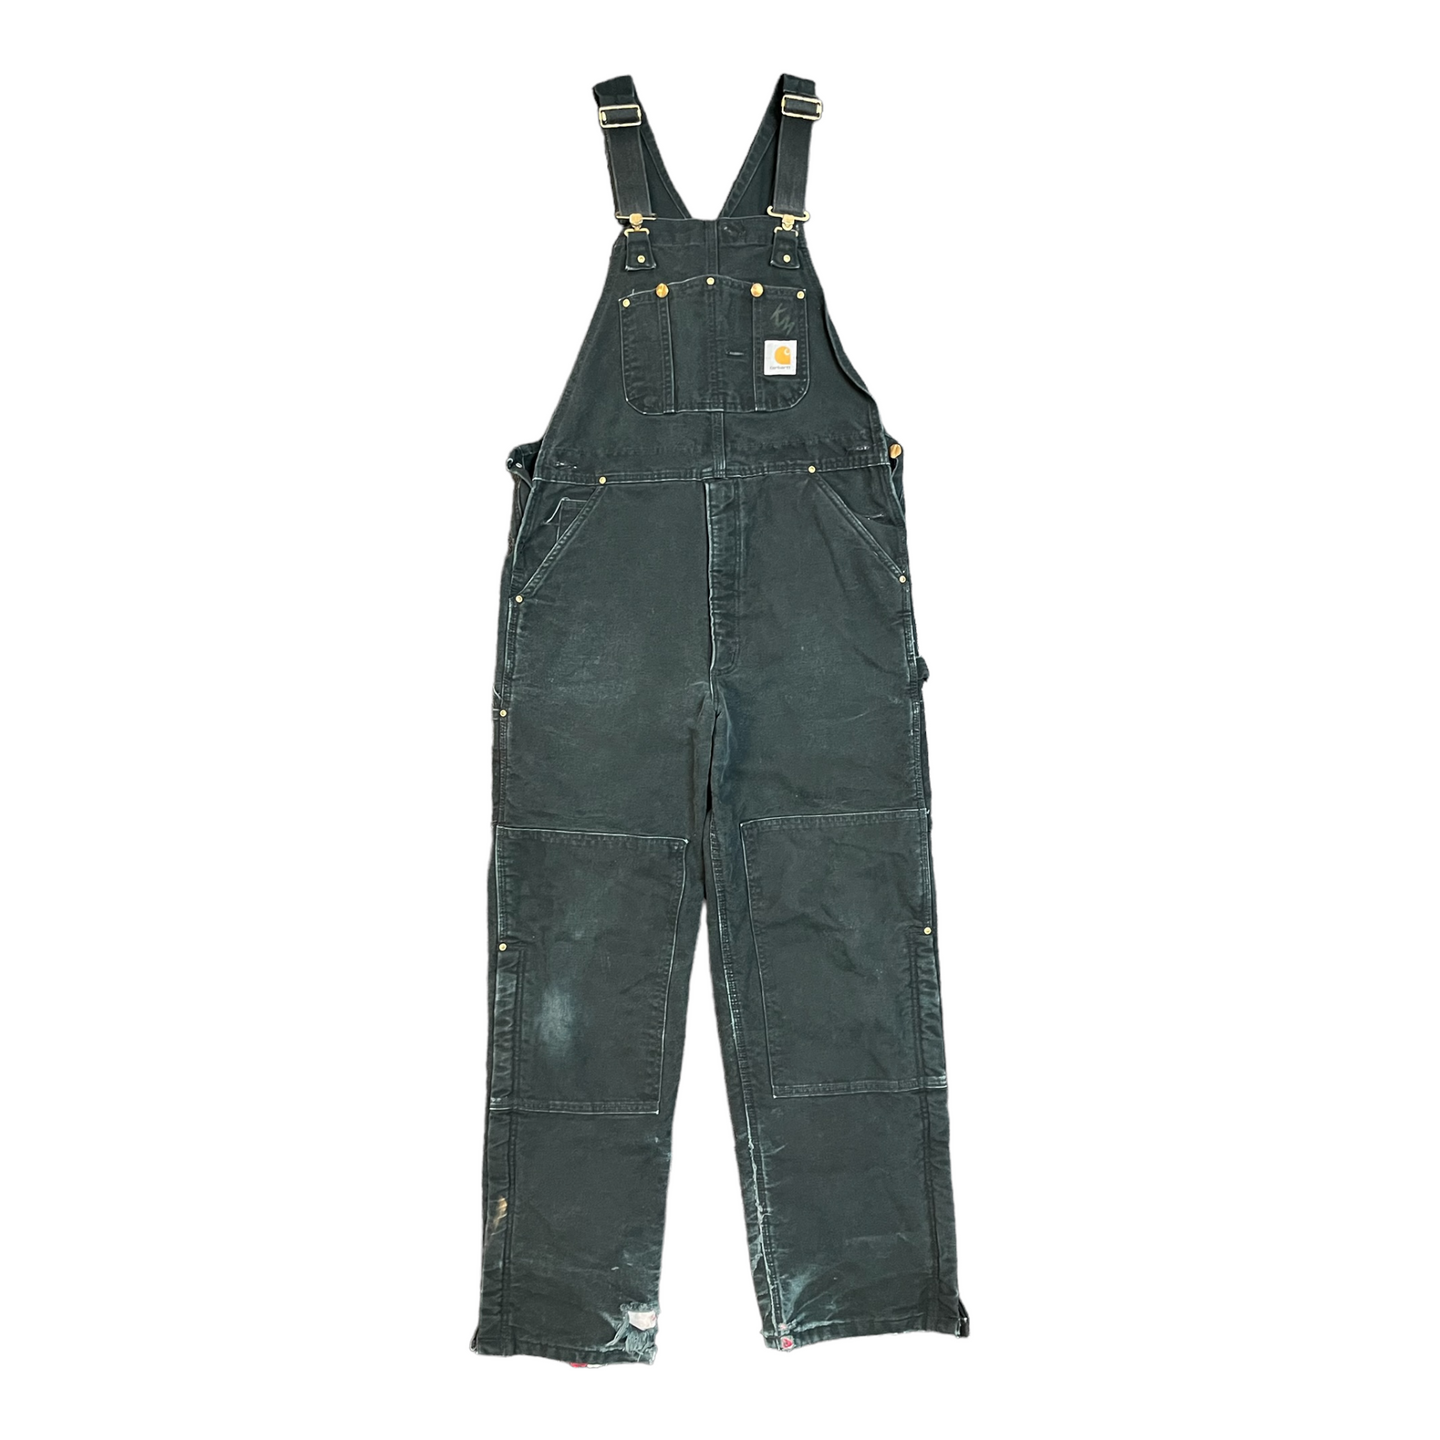 Vintage Carhartt quilt-lined overalls 36x32